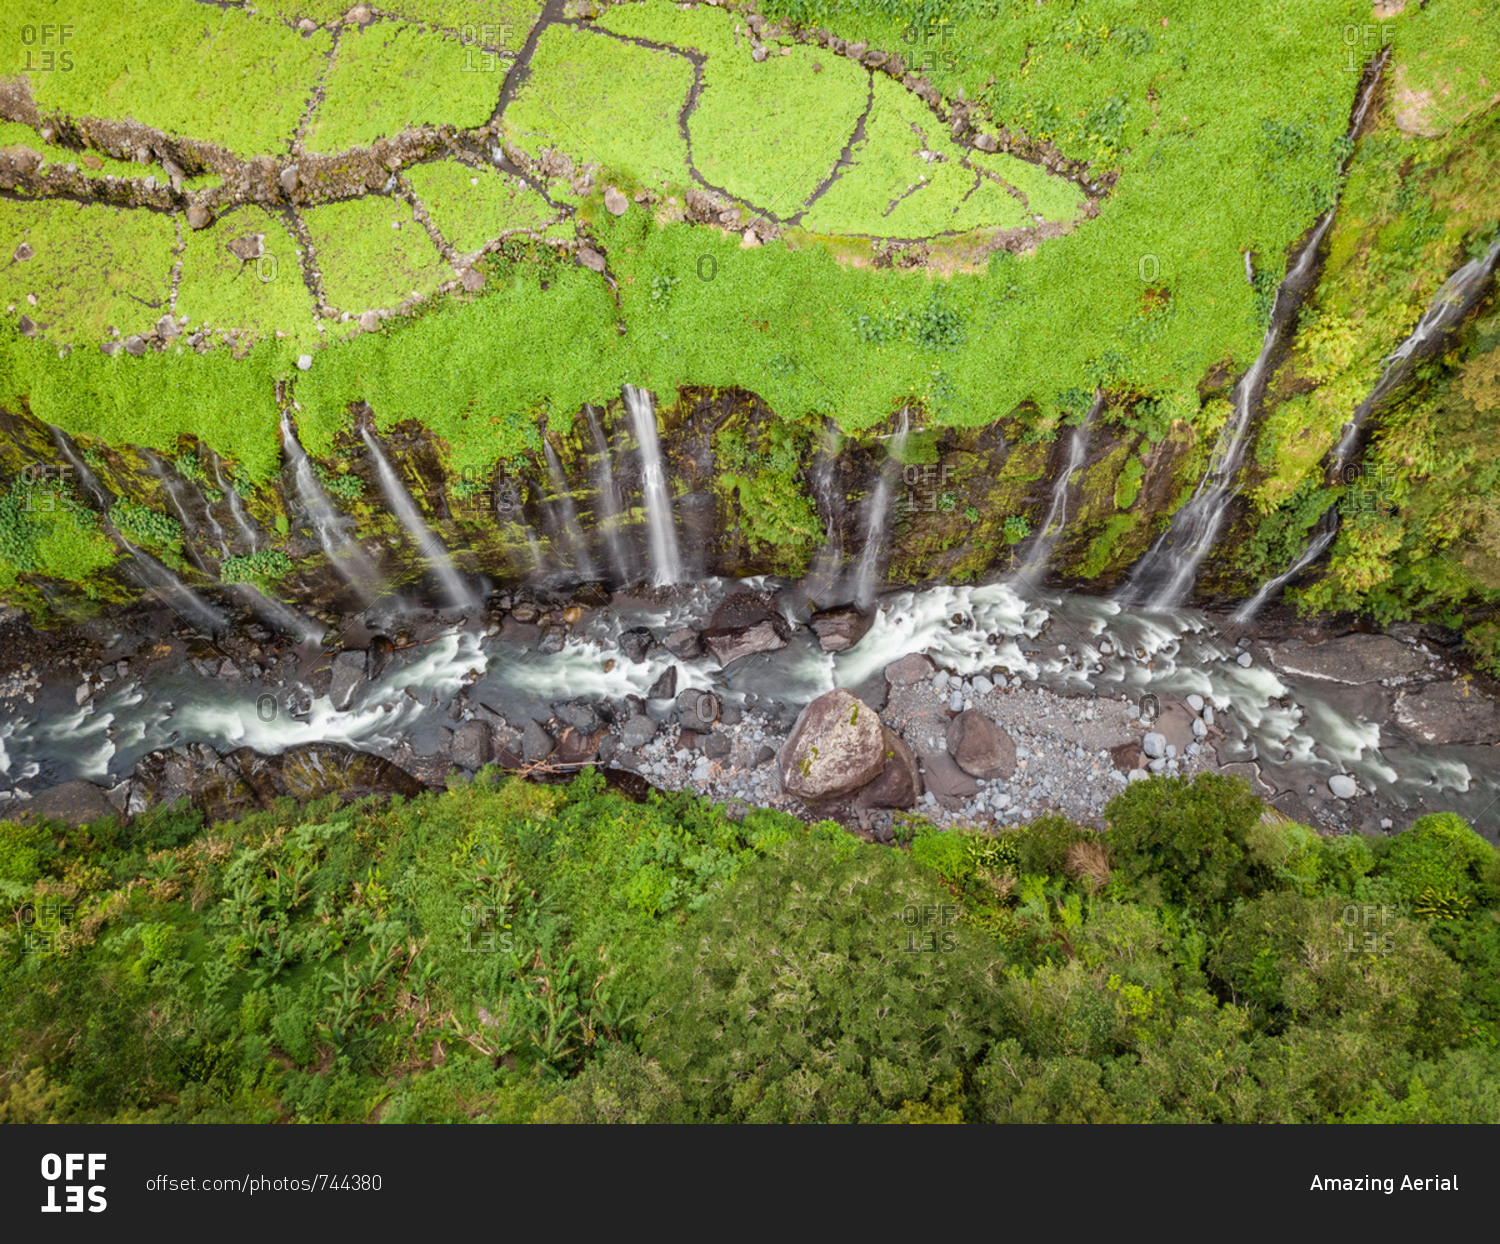 Aerial view of Voile de la Mariee waterfall, Reunion island.